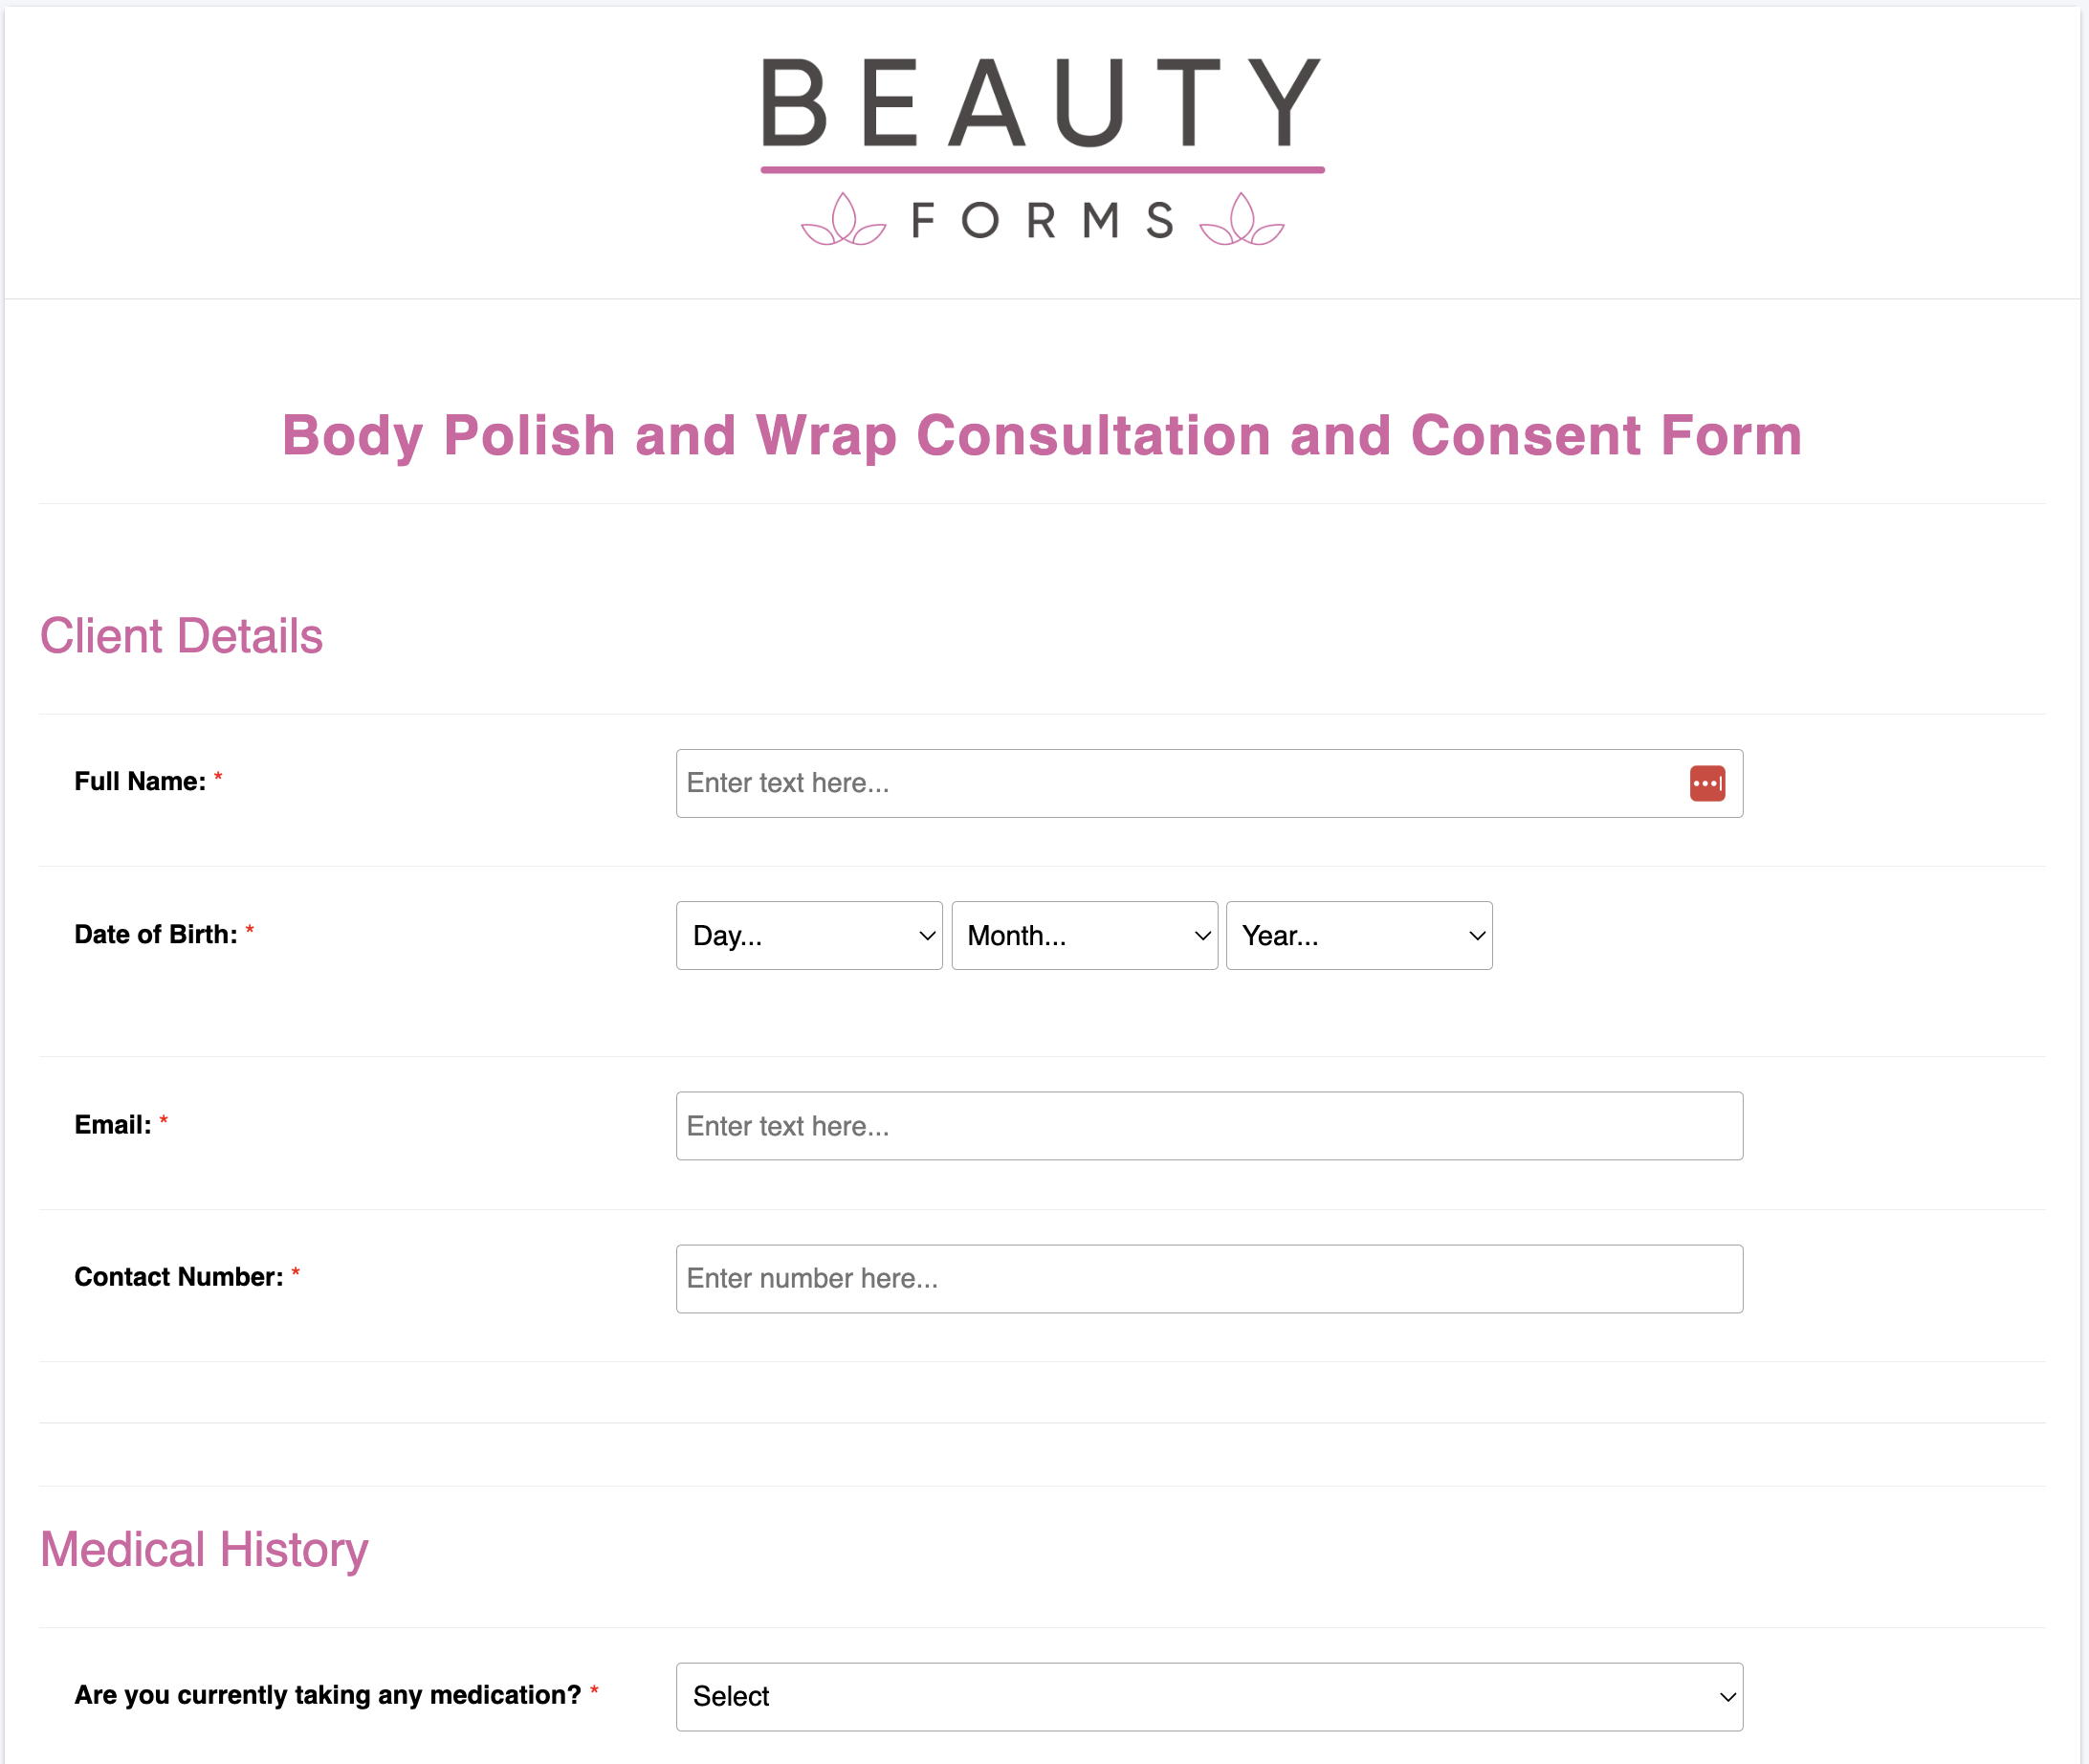 Body Polish and Wrap Consent Form